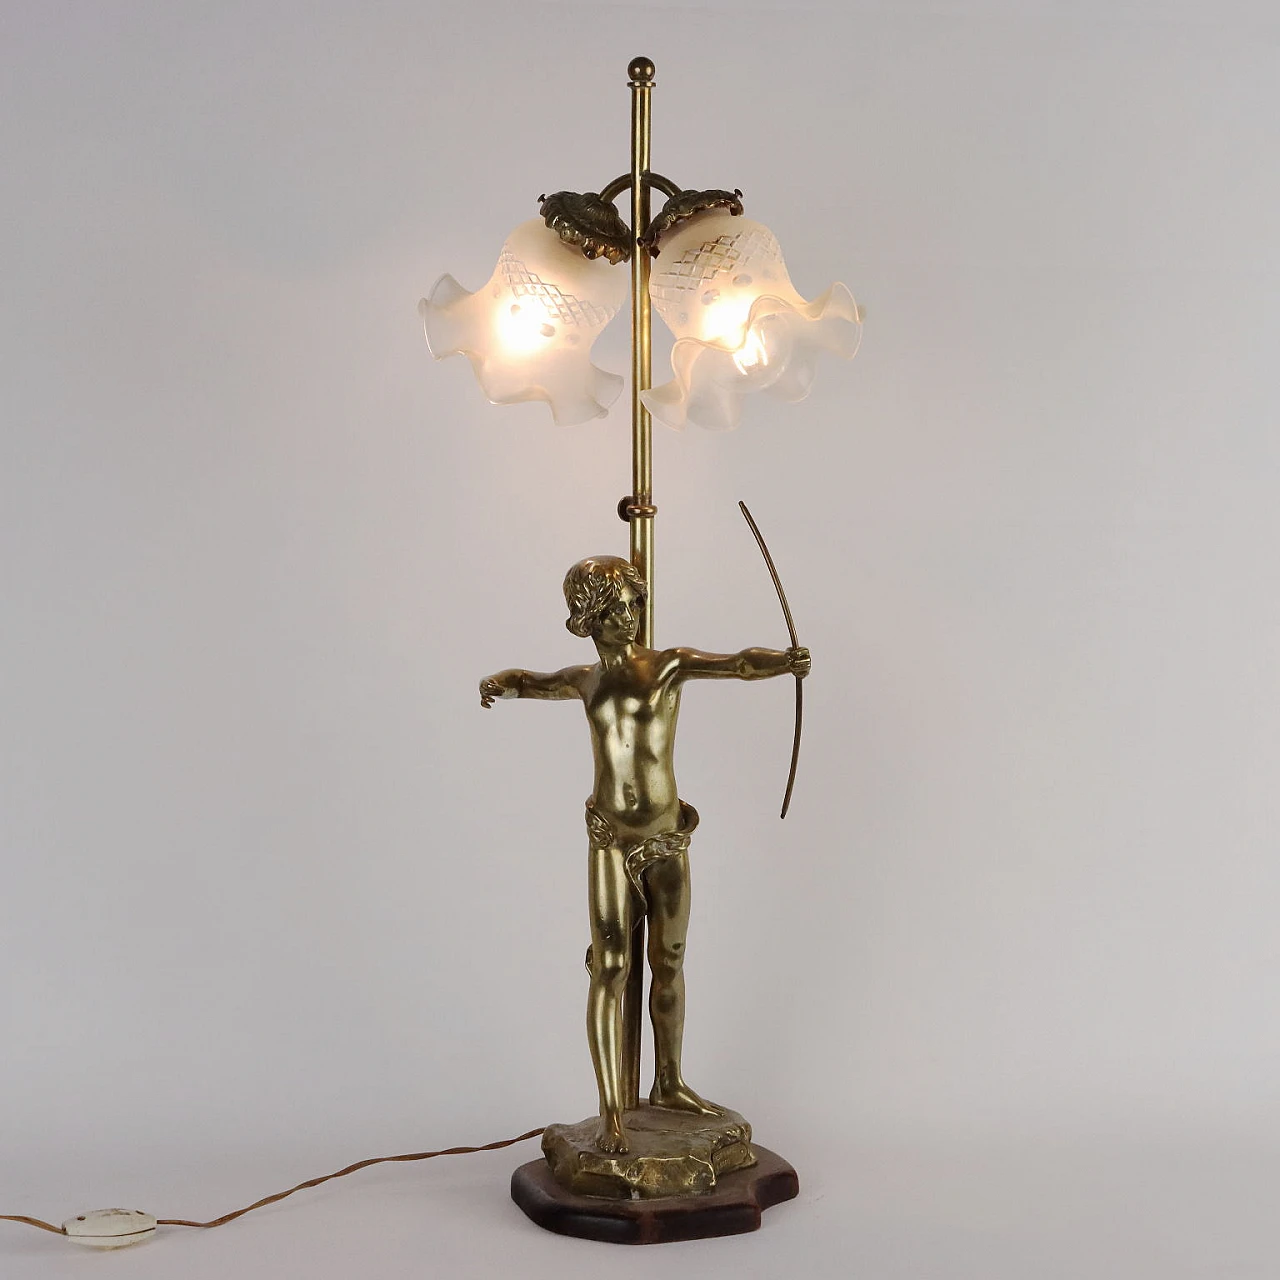 Table lamp with bronze sculpture & glass lampshades by Scotte 1